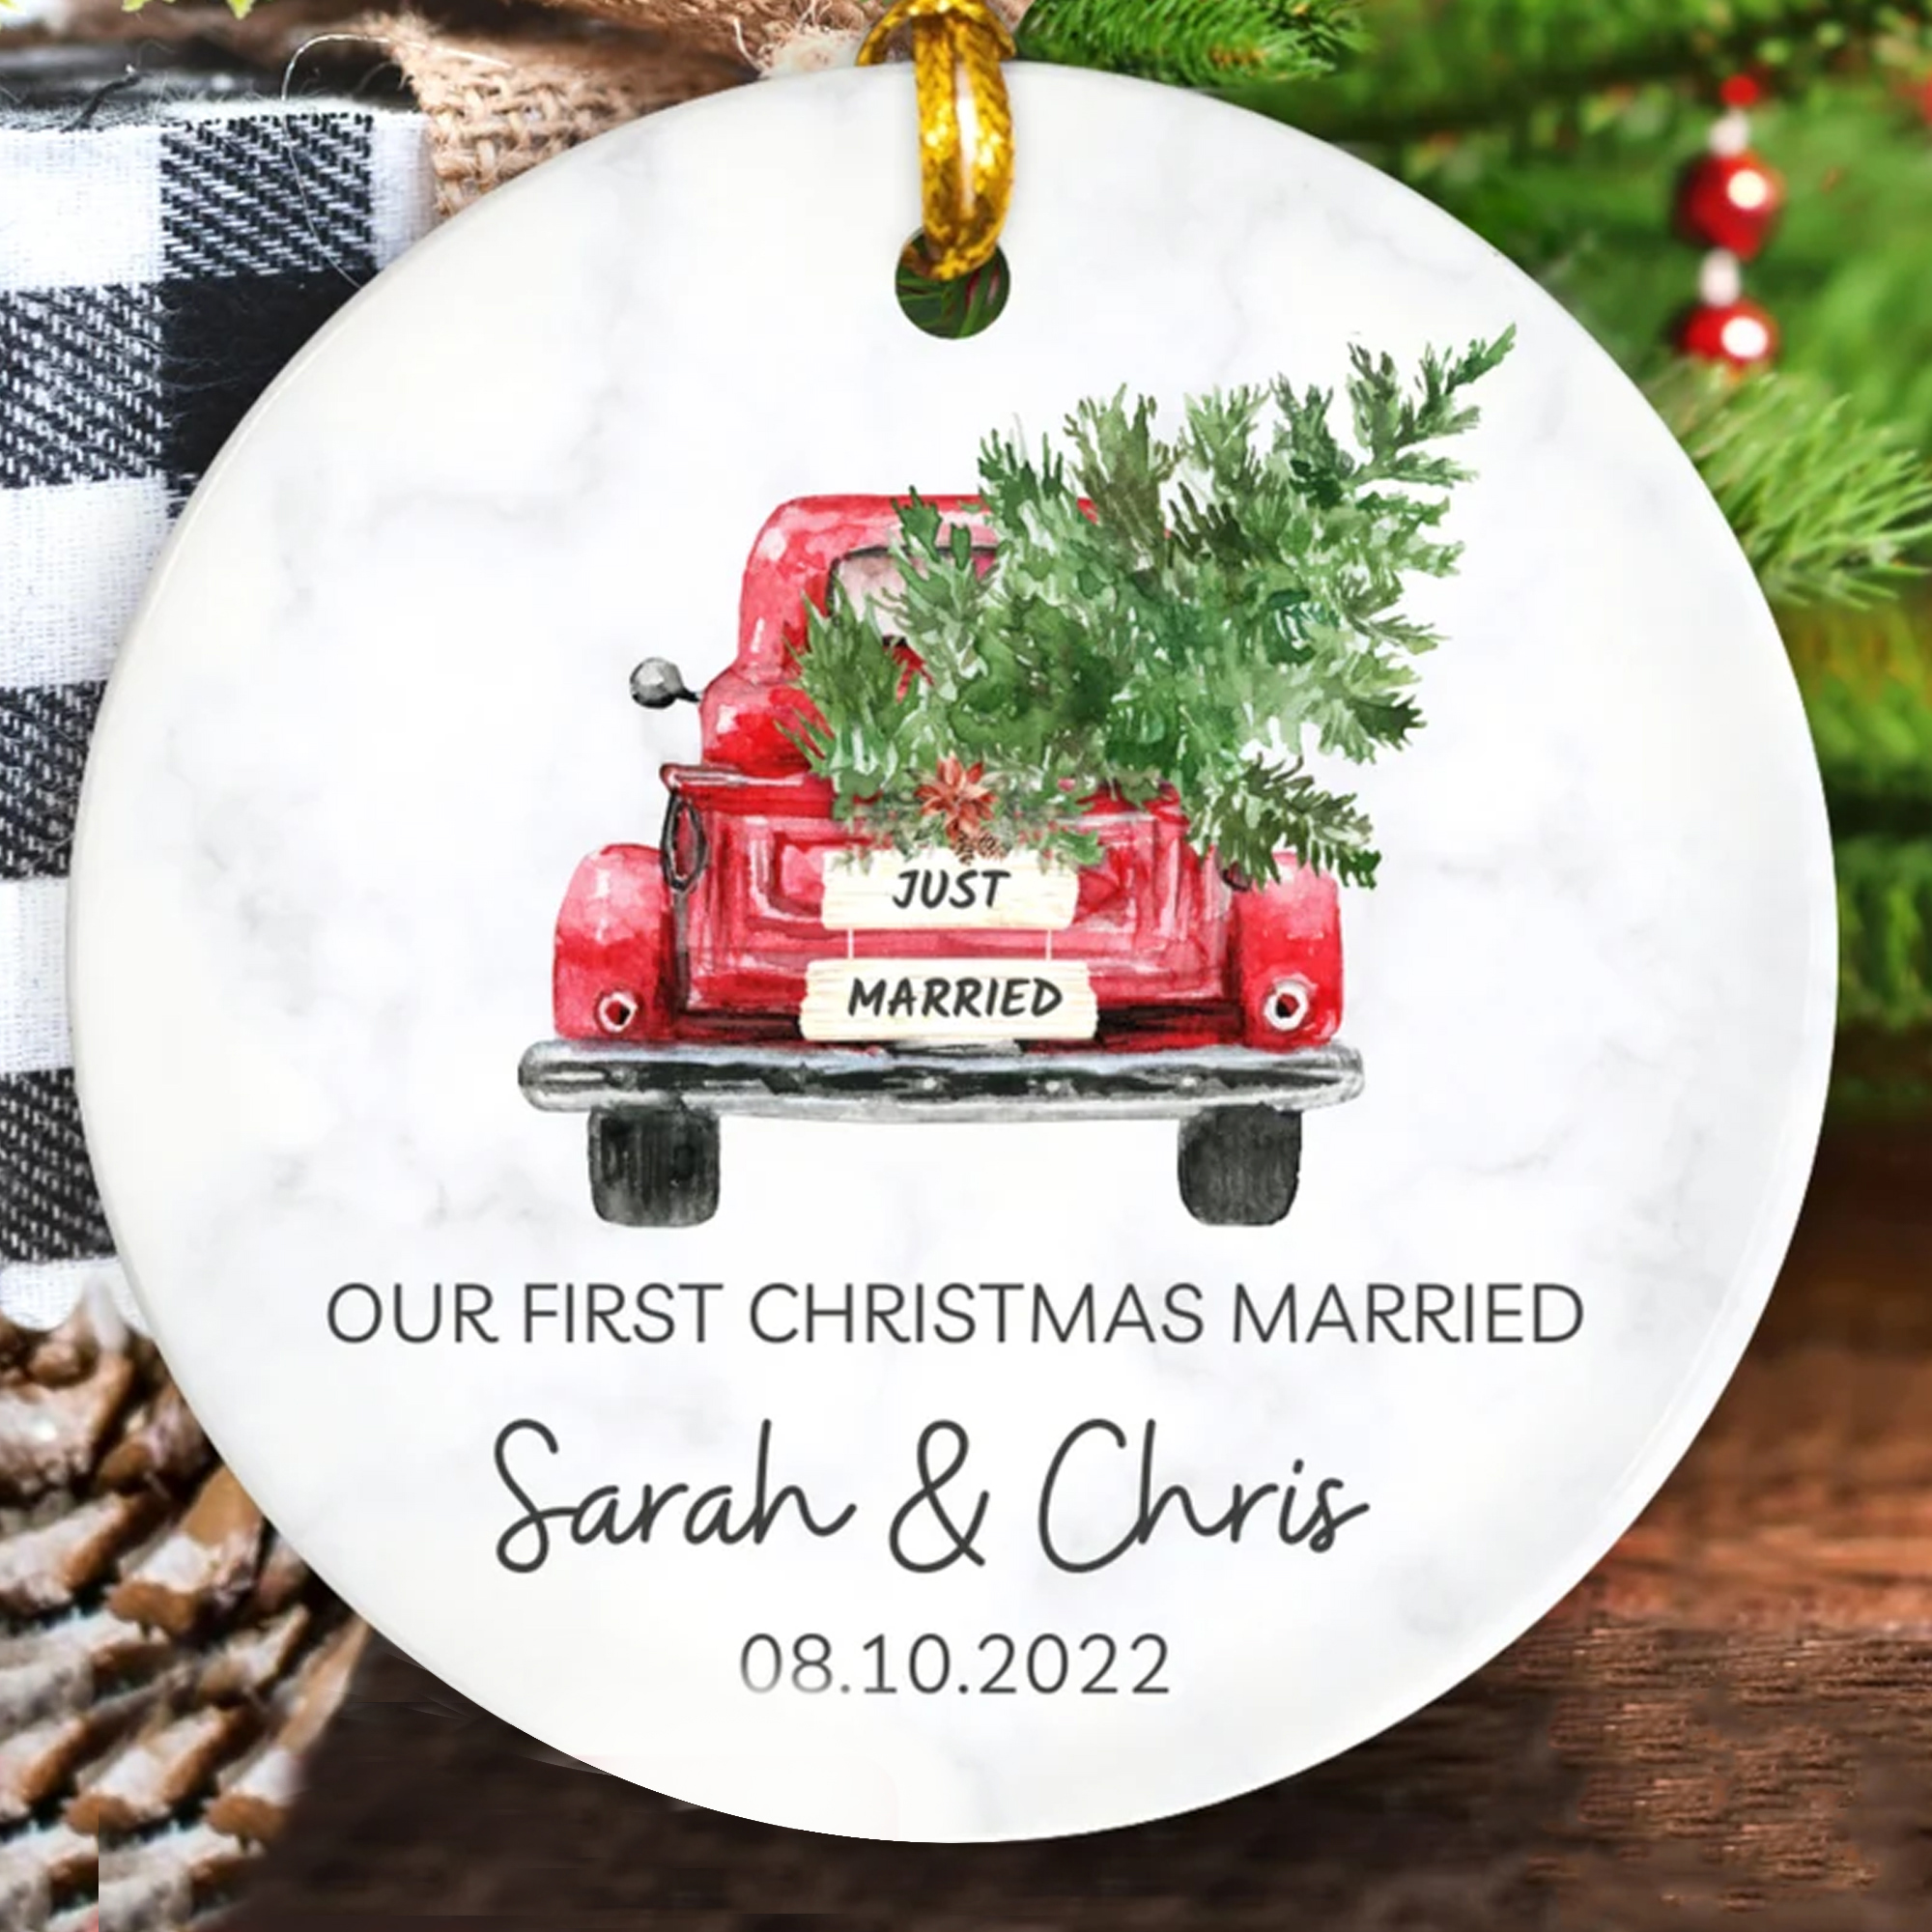 Personalzed First Christmas Married Ornament Personalized Mr And Mrs 2021 Ornament Wedding Gift Keepsake Custom Married Christmas Ornament Copy